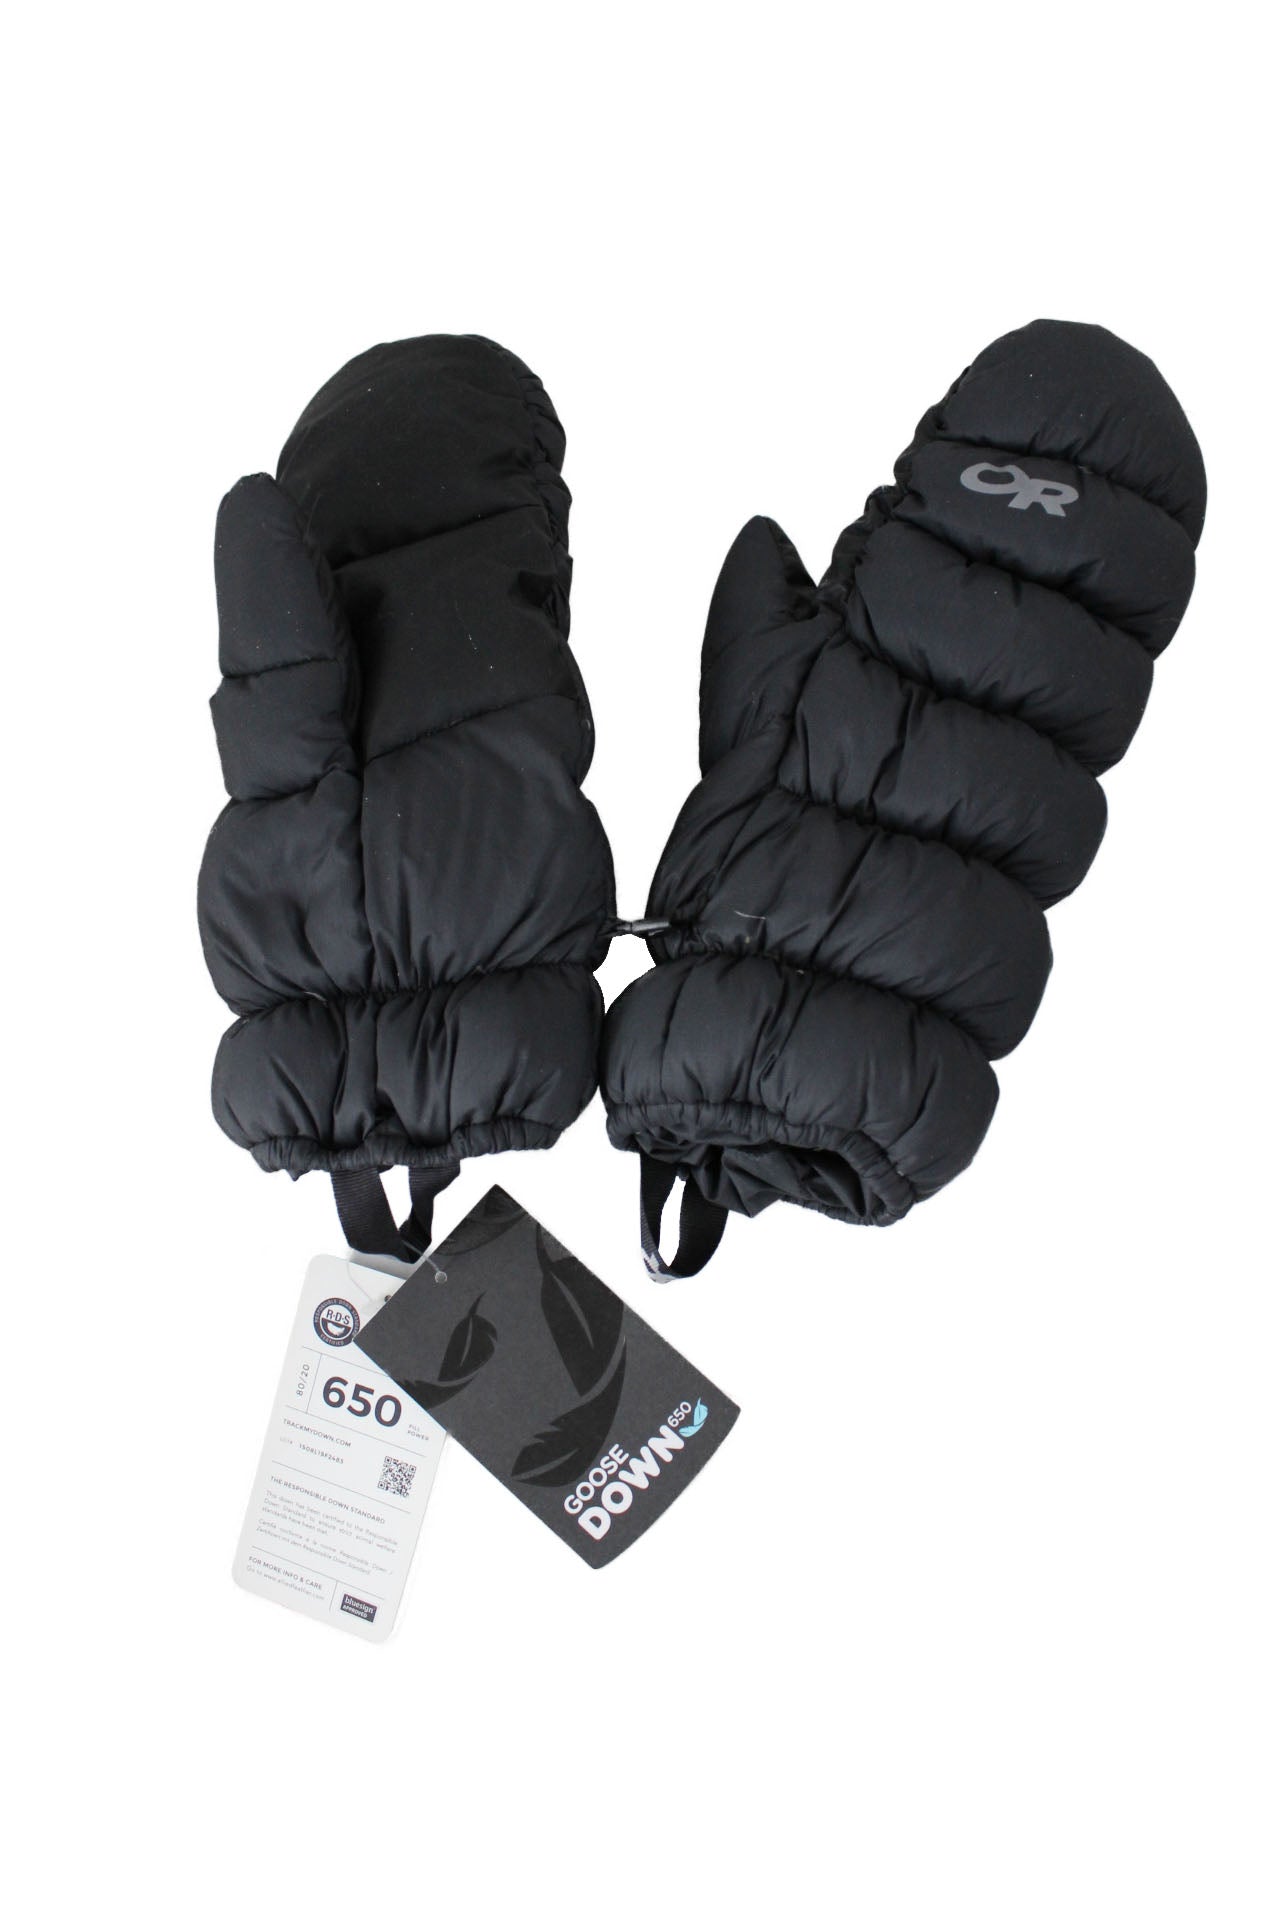 outdoor research coldfront down mittens. features polyester ripstop material, 650-fill down for warmth, tricot lining, silicone palm and thumb enchancement for grip and durability. 